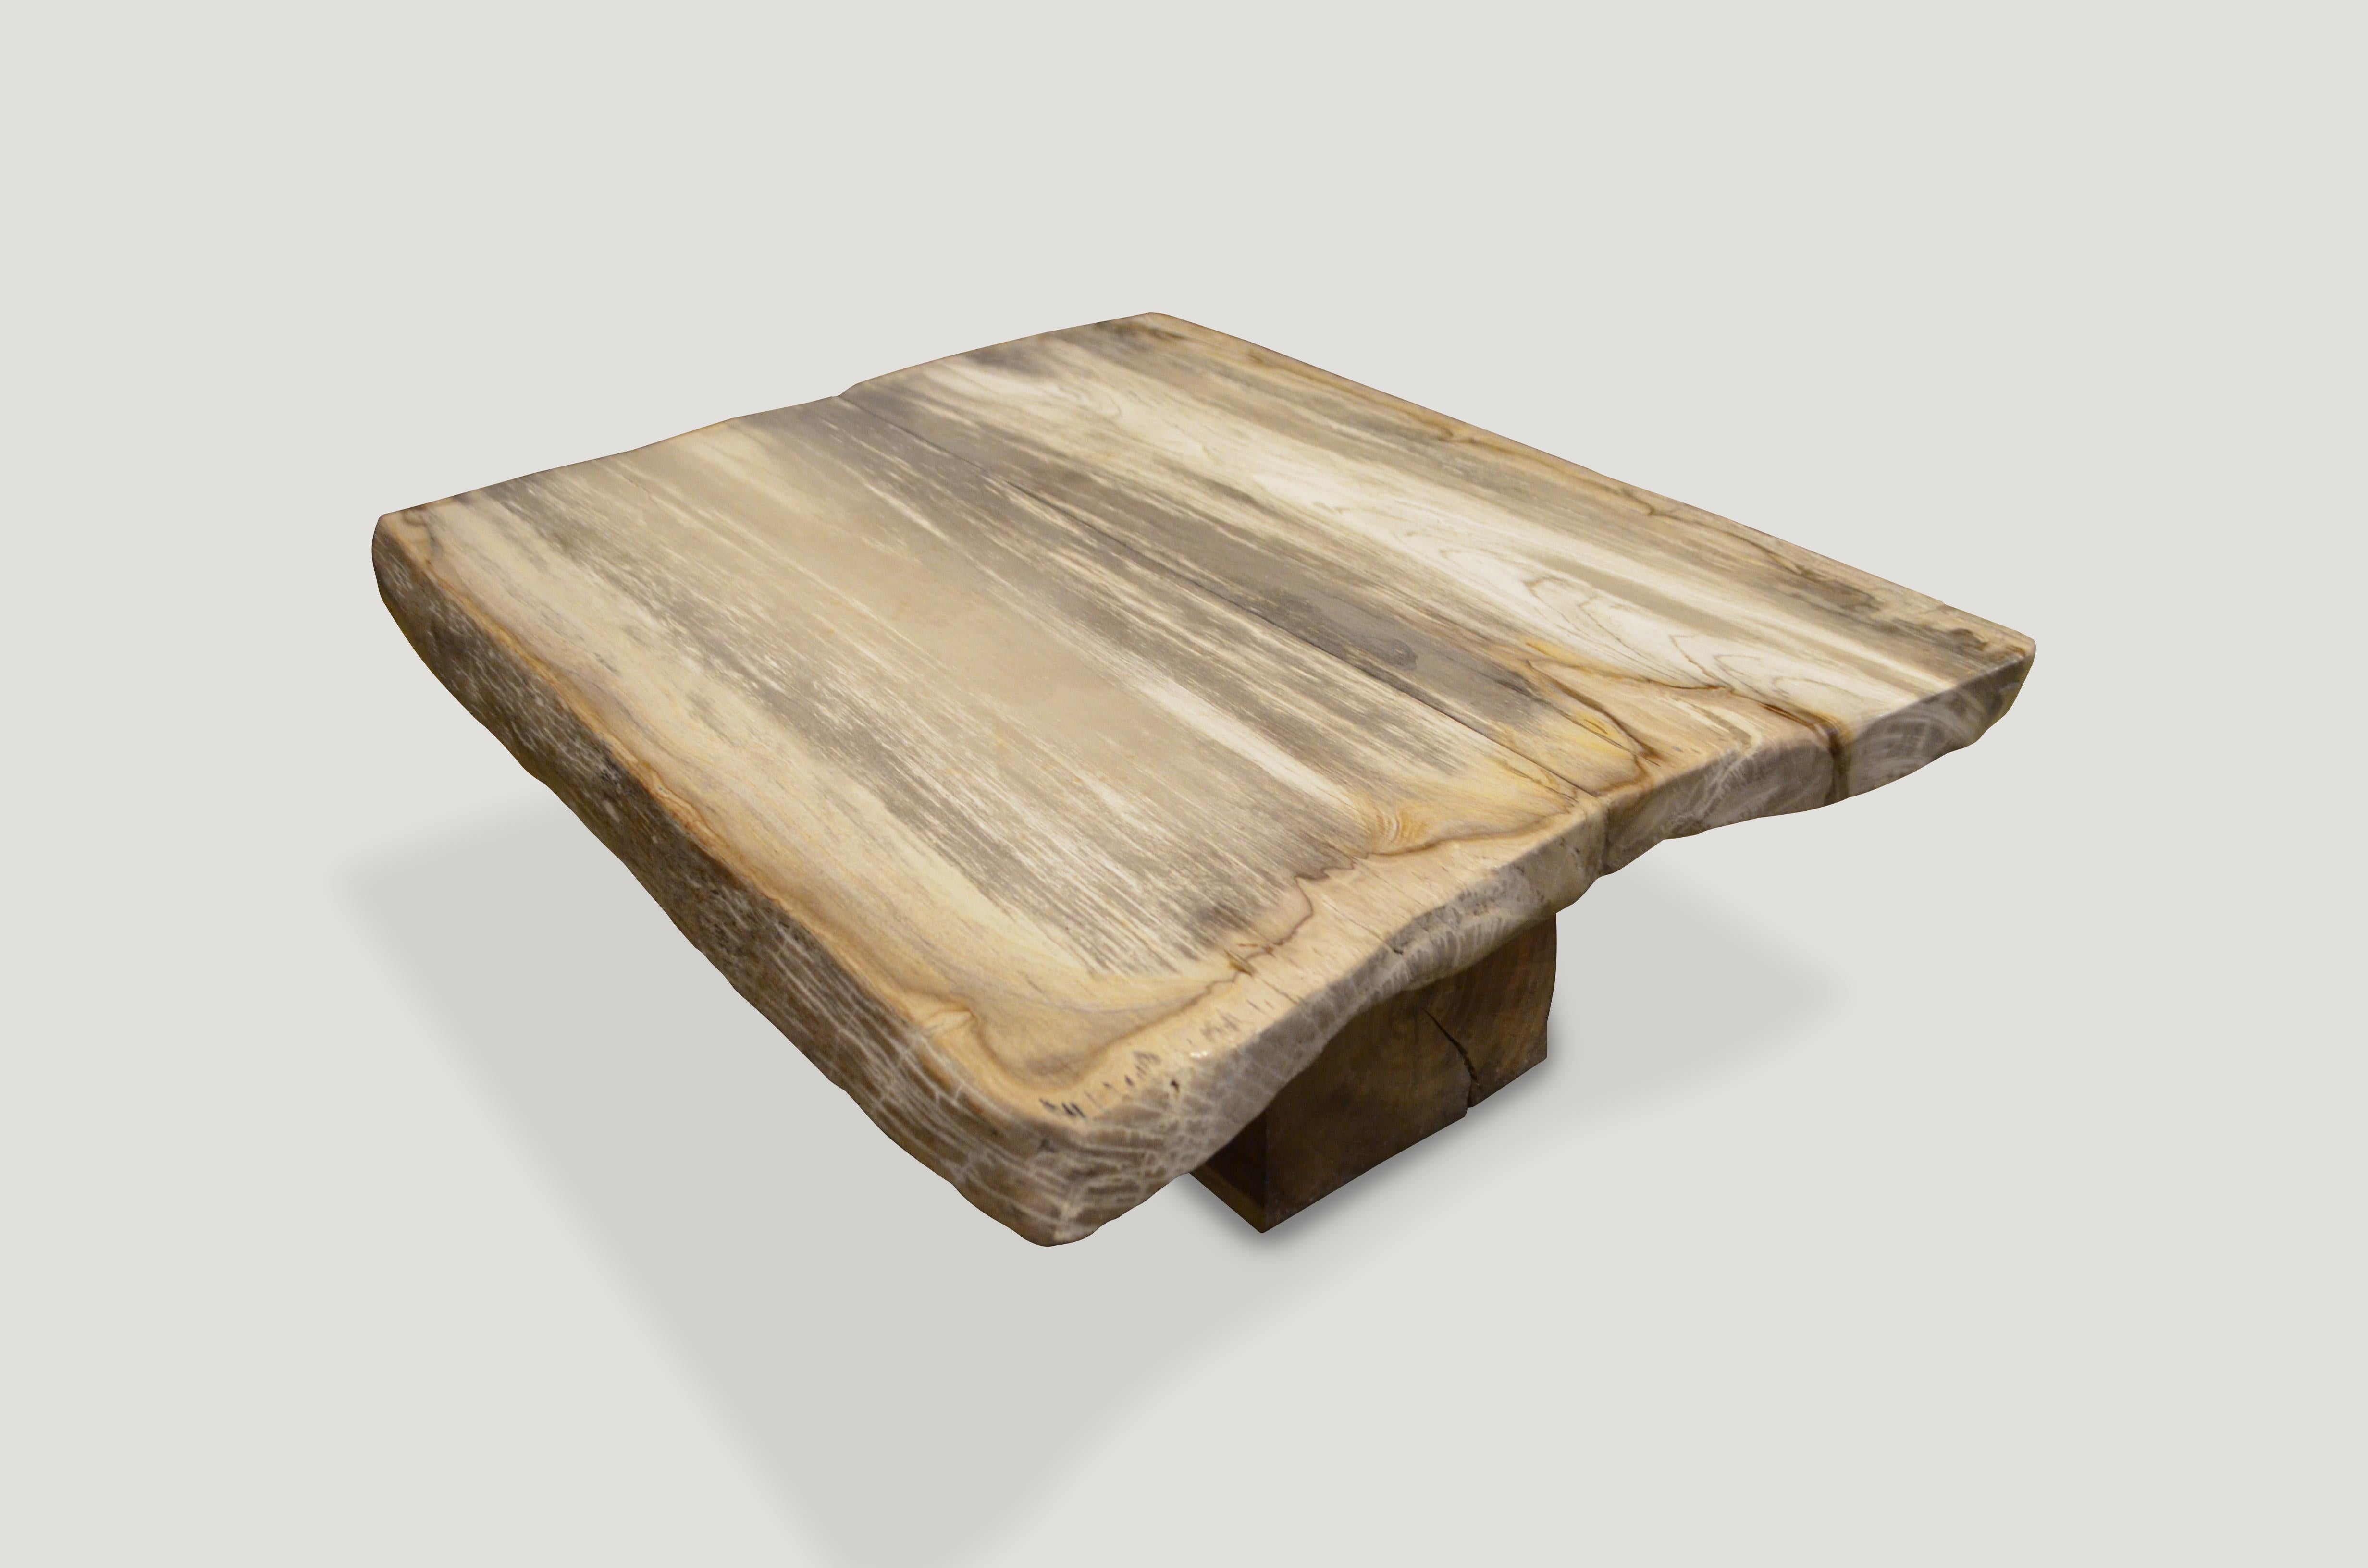 High quality super smooth petrified wood coffee table or counter top. Stunning cream and beige tones on this impressive three inch slab floating on a single natural teak base. The height can be modified depending on the desired use. 

We source